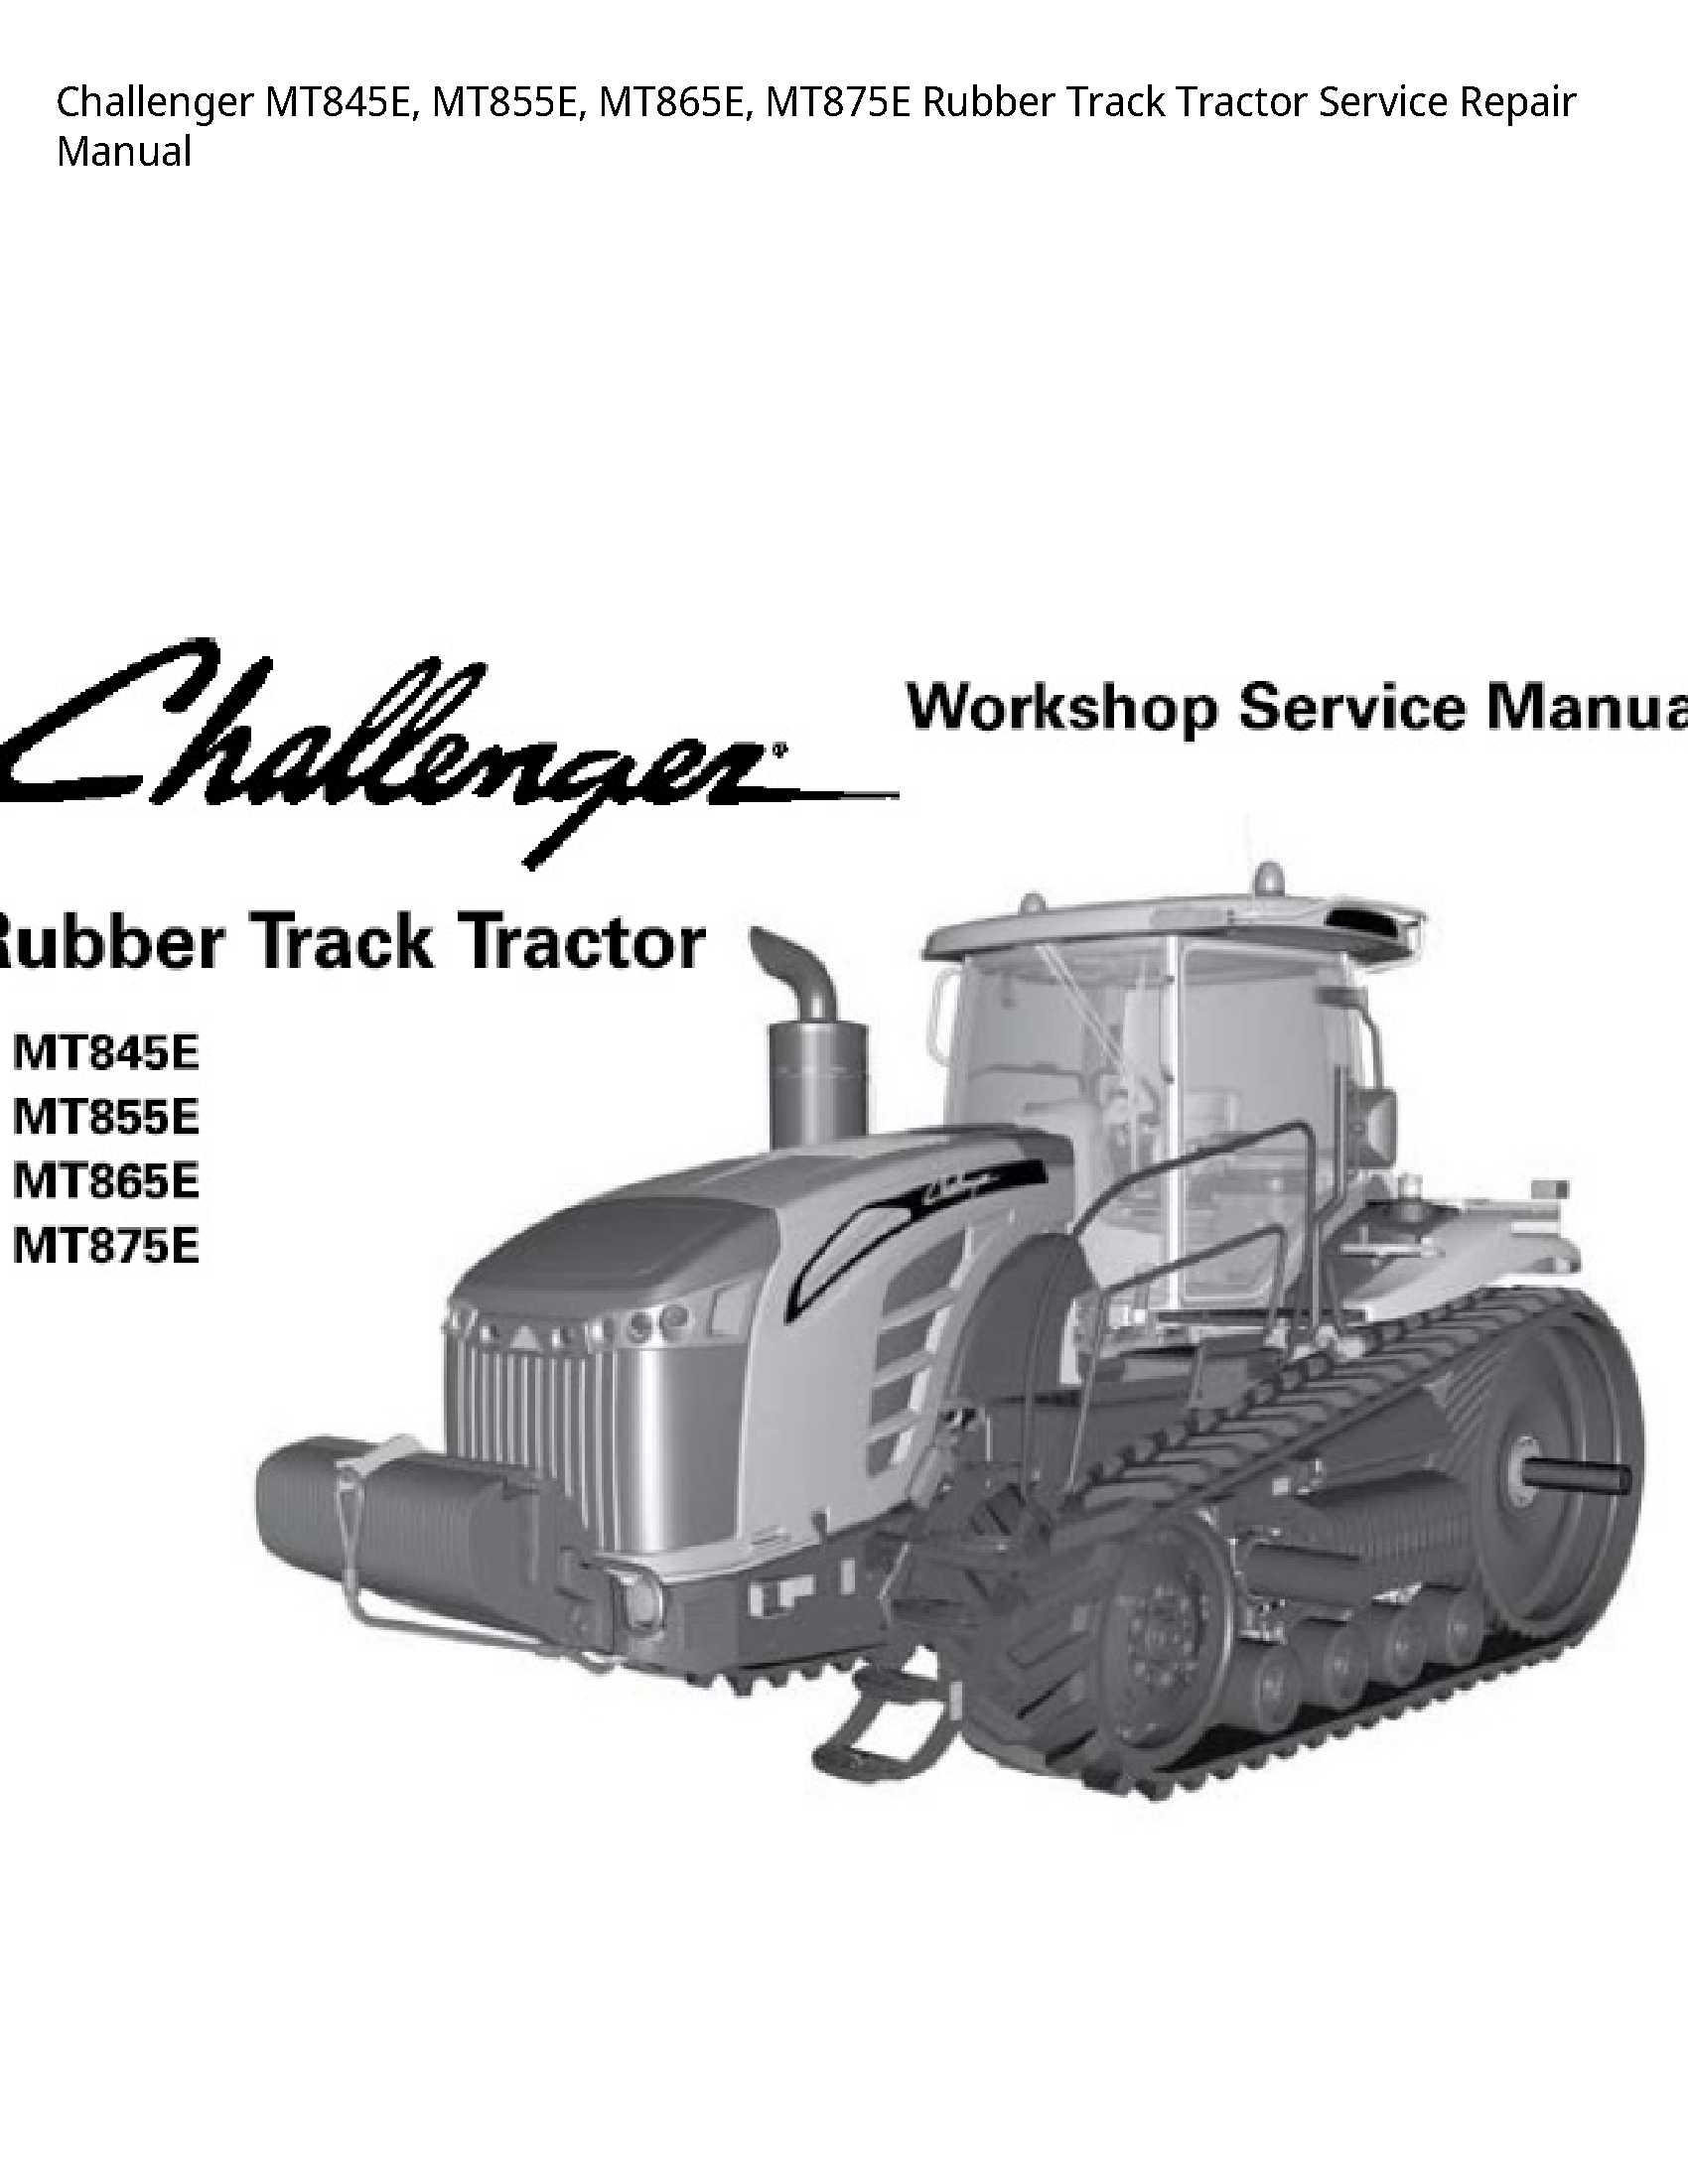 Challenger MT845E Rubber Track Tractor manual